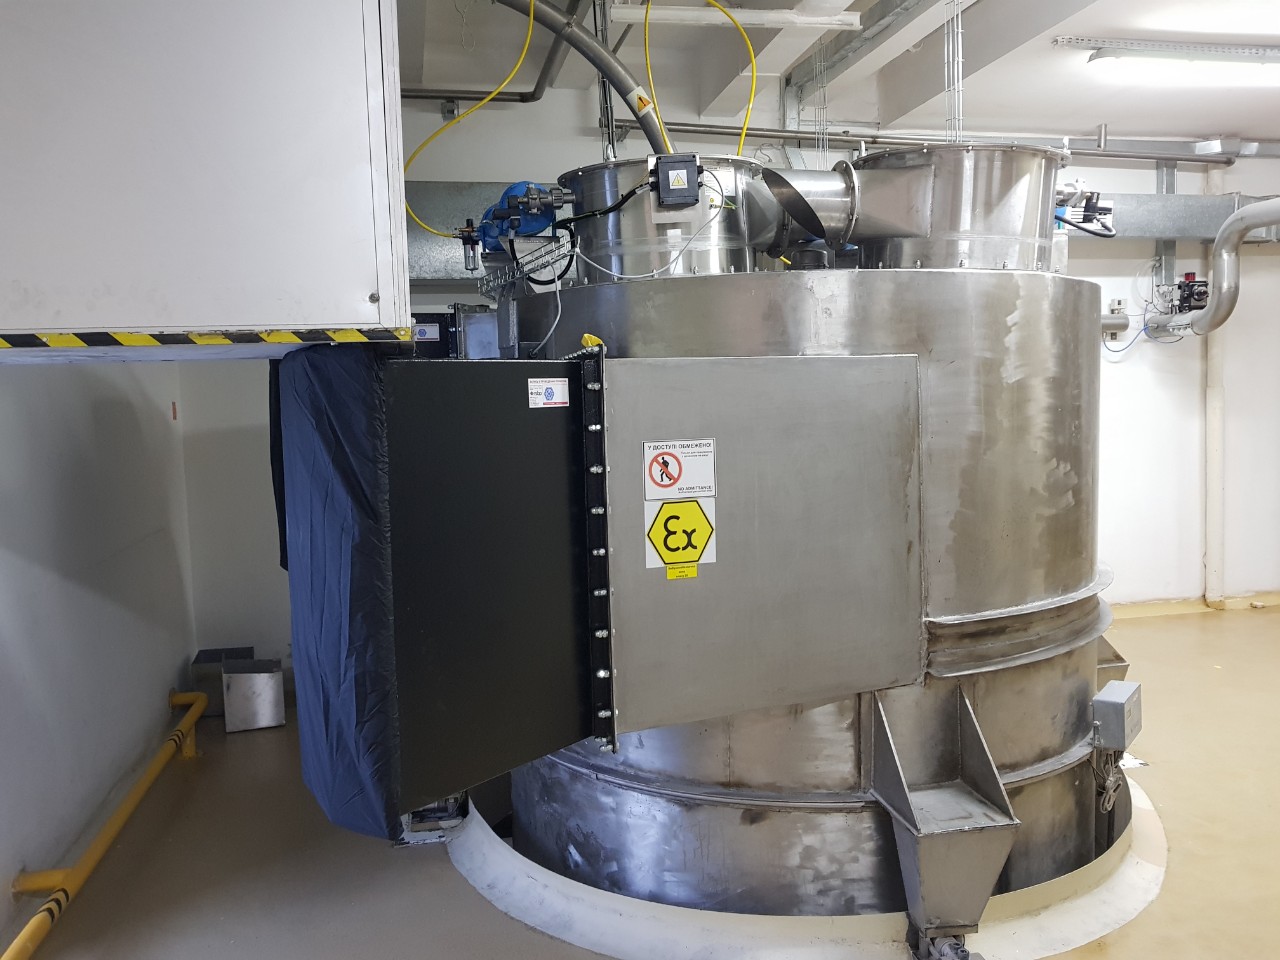 Turnkey explosion protection system for industrial foodstuffs production facilities